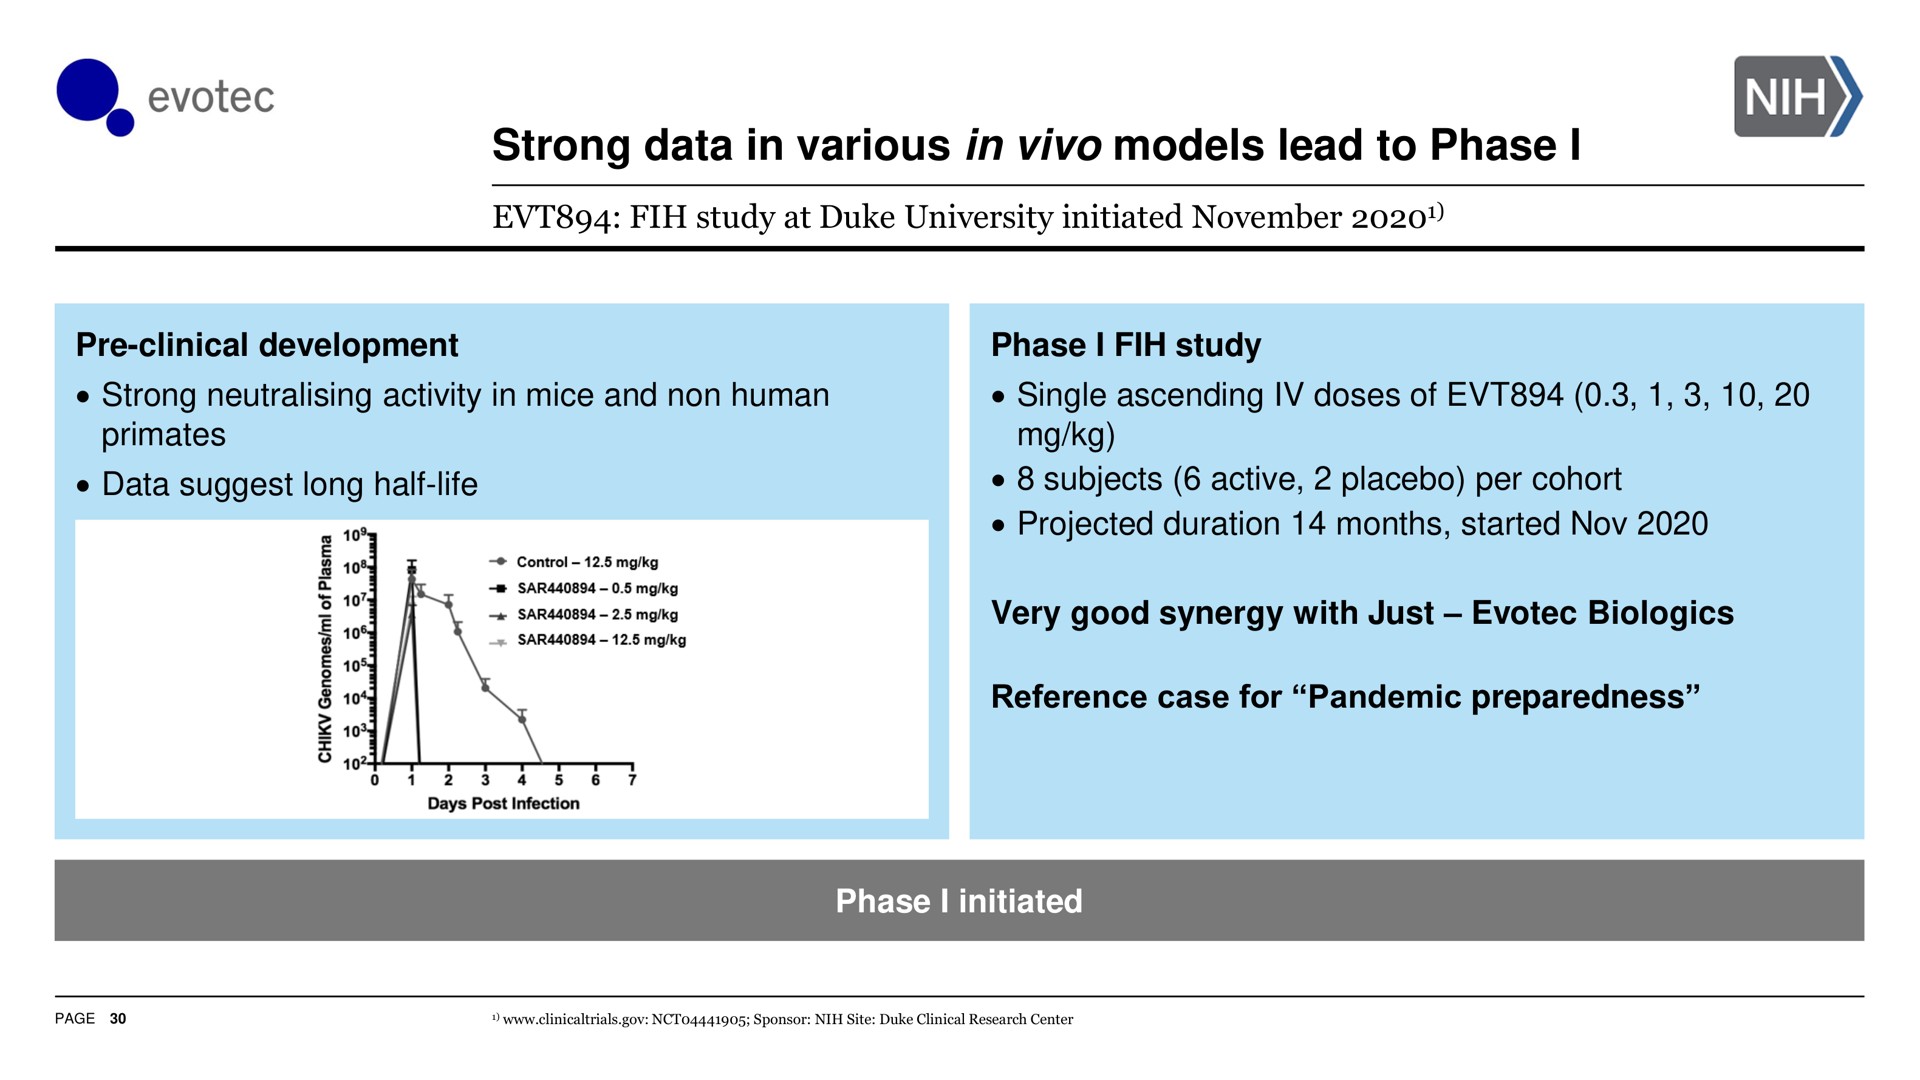 strong data in various in models lead to phase i | Evotec